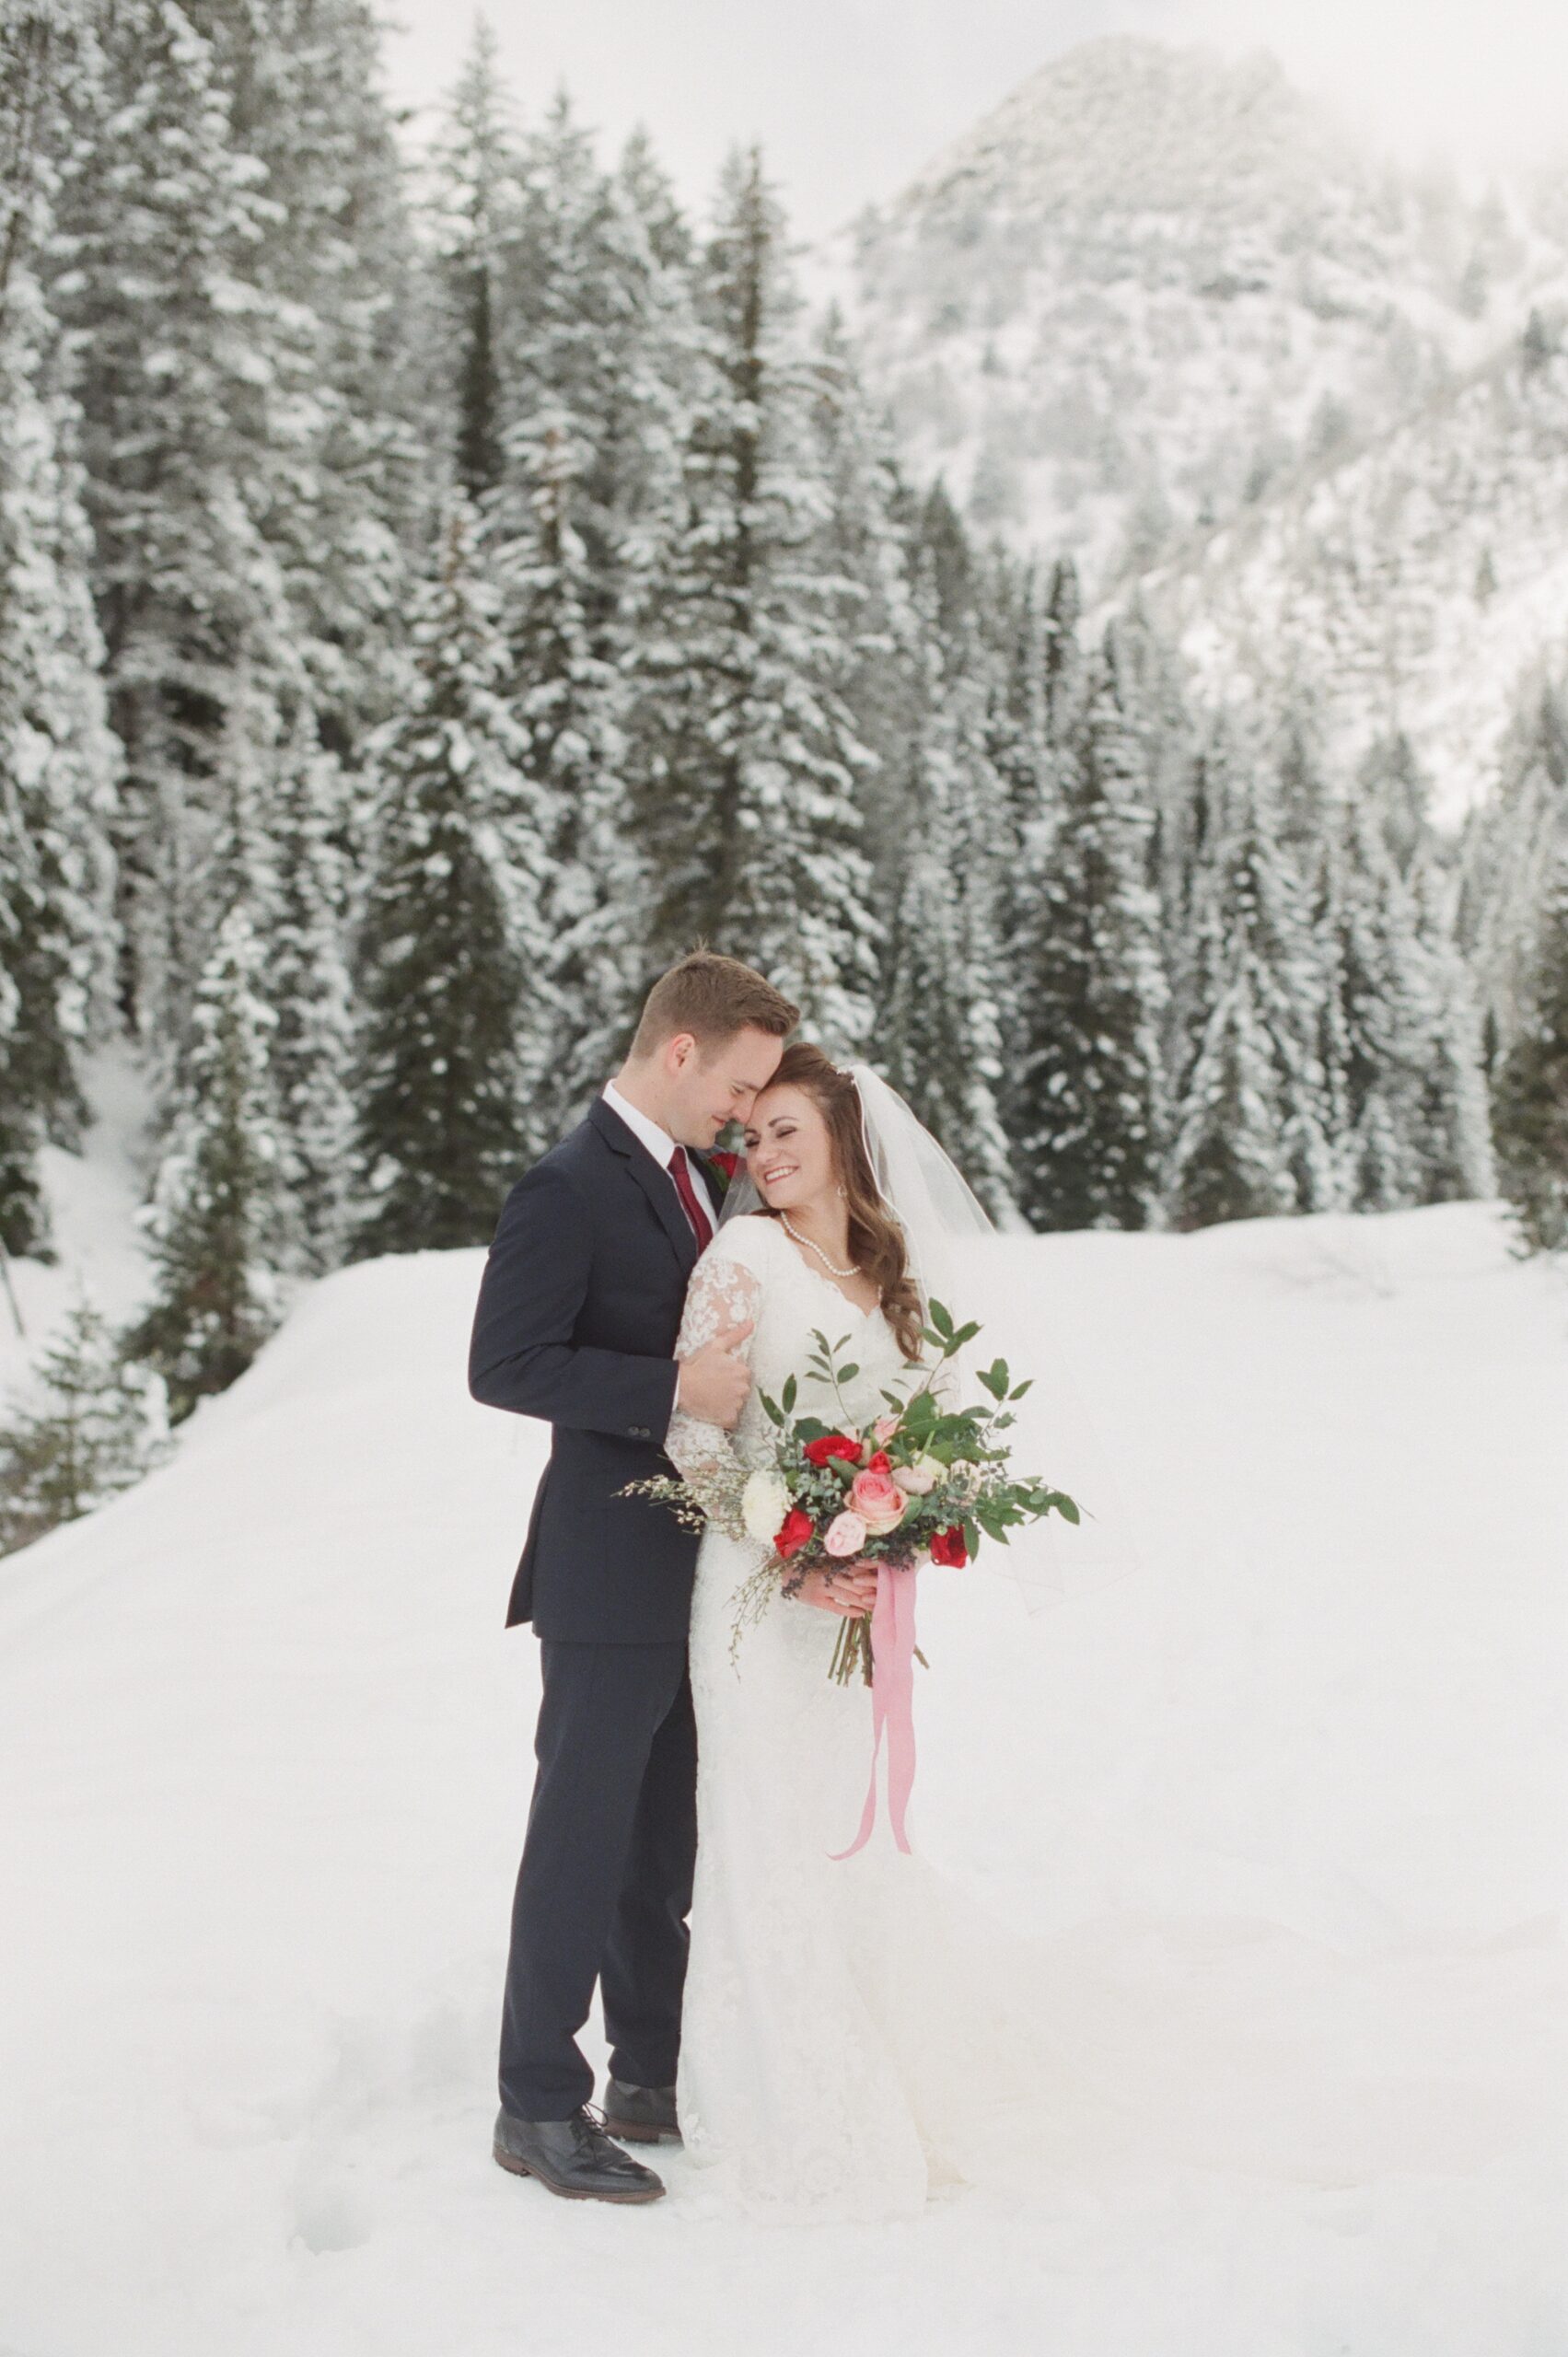 Utah winter photographer tips for bridals in the snow, with the snowcapped mountains and trees